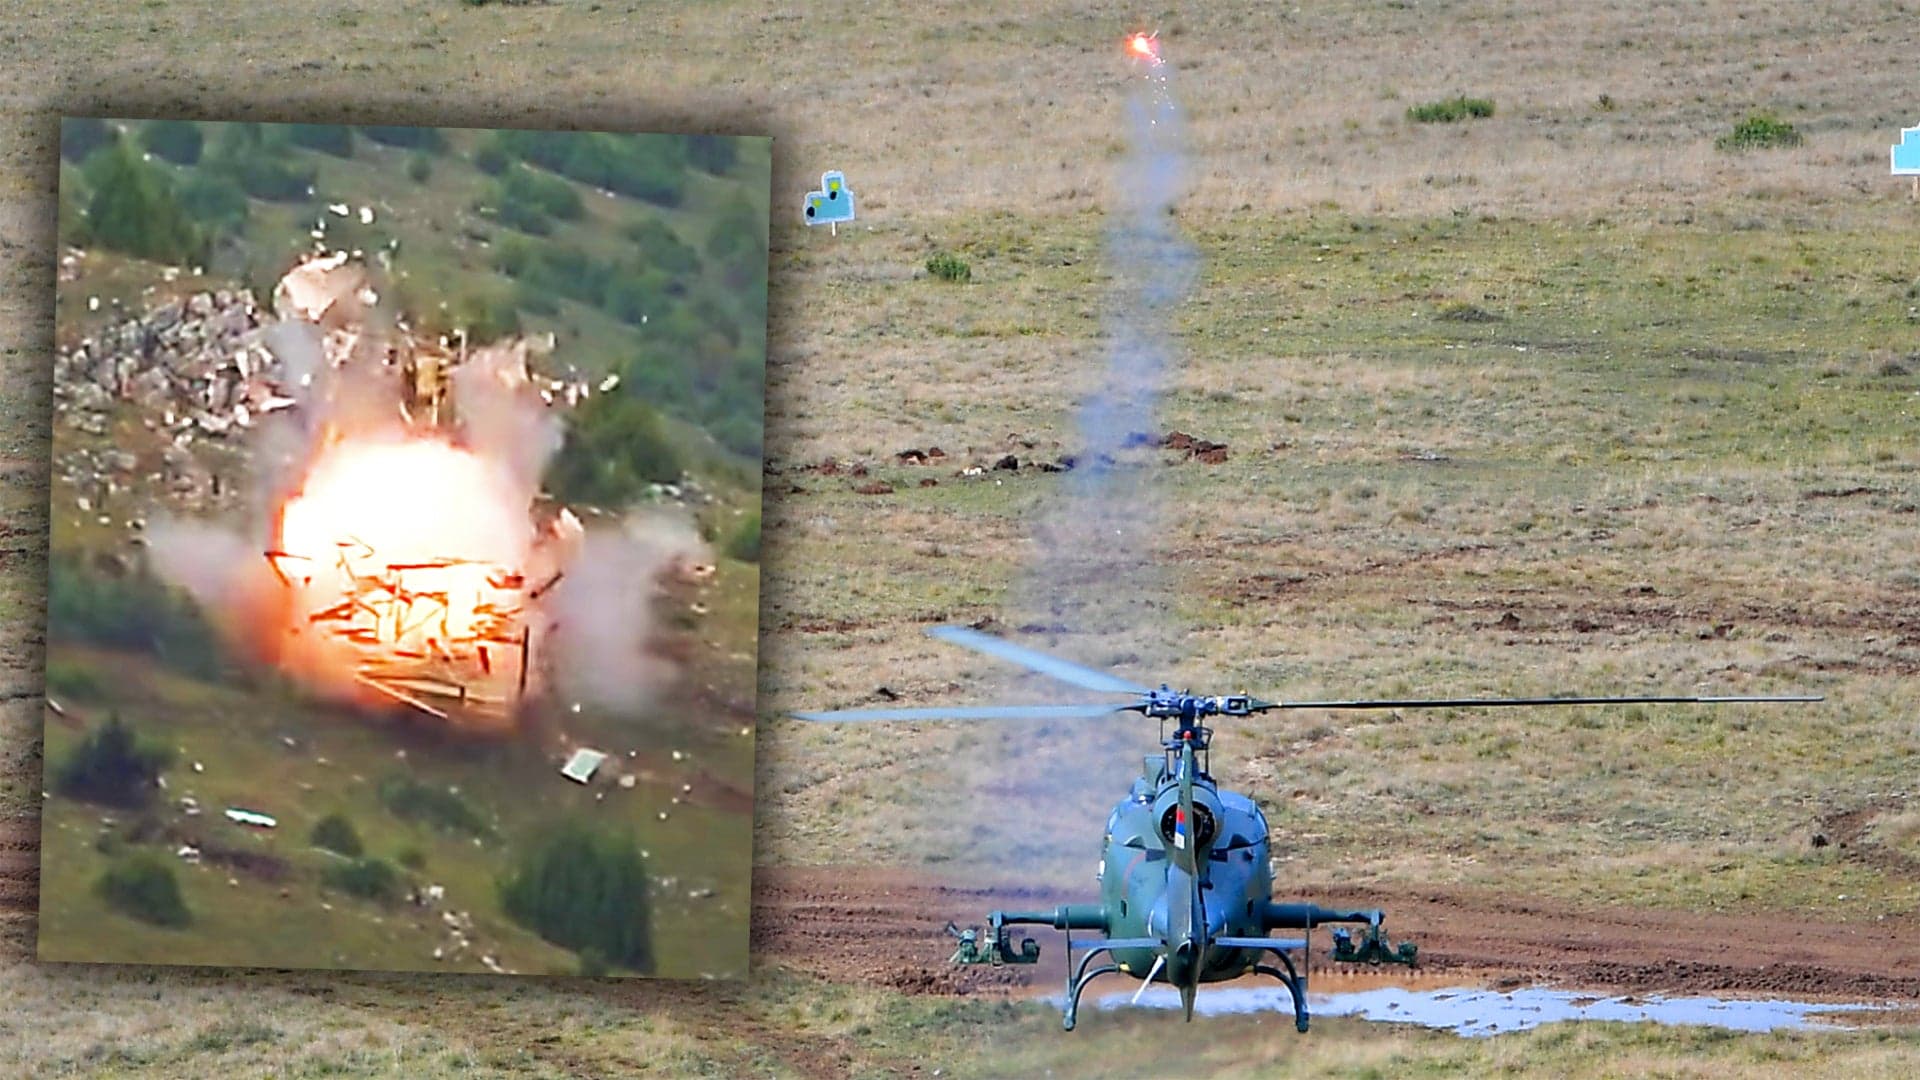 Serbian Helicopters Blow Up Targets In Some Of The Best Anti-Tank Missile Footage We’ve Seen